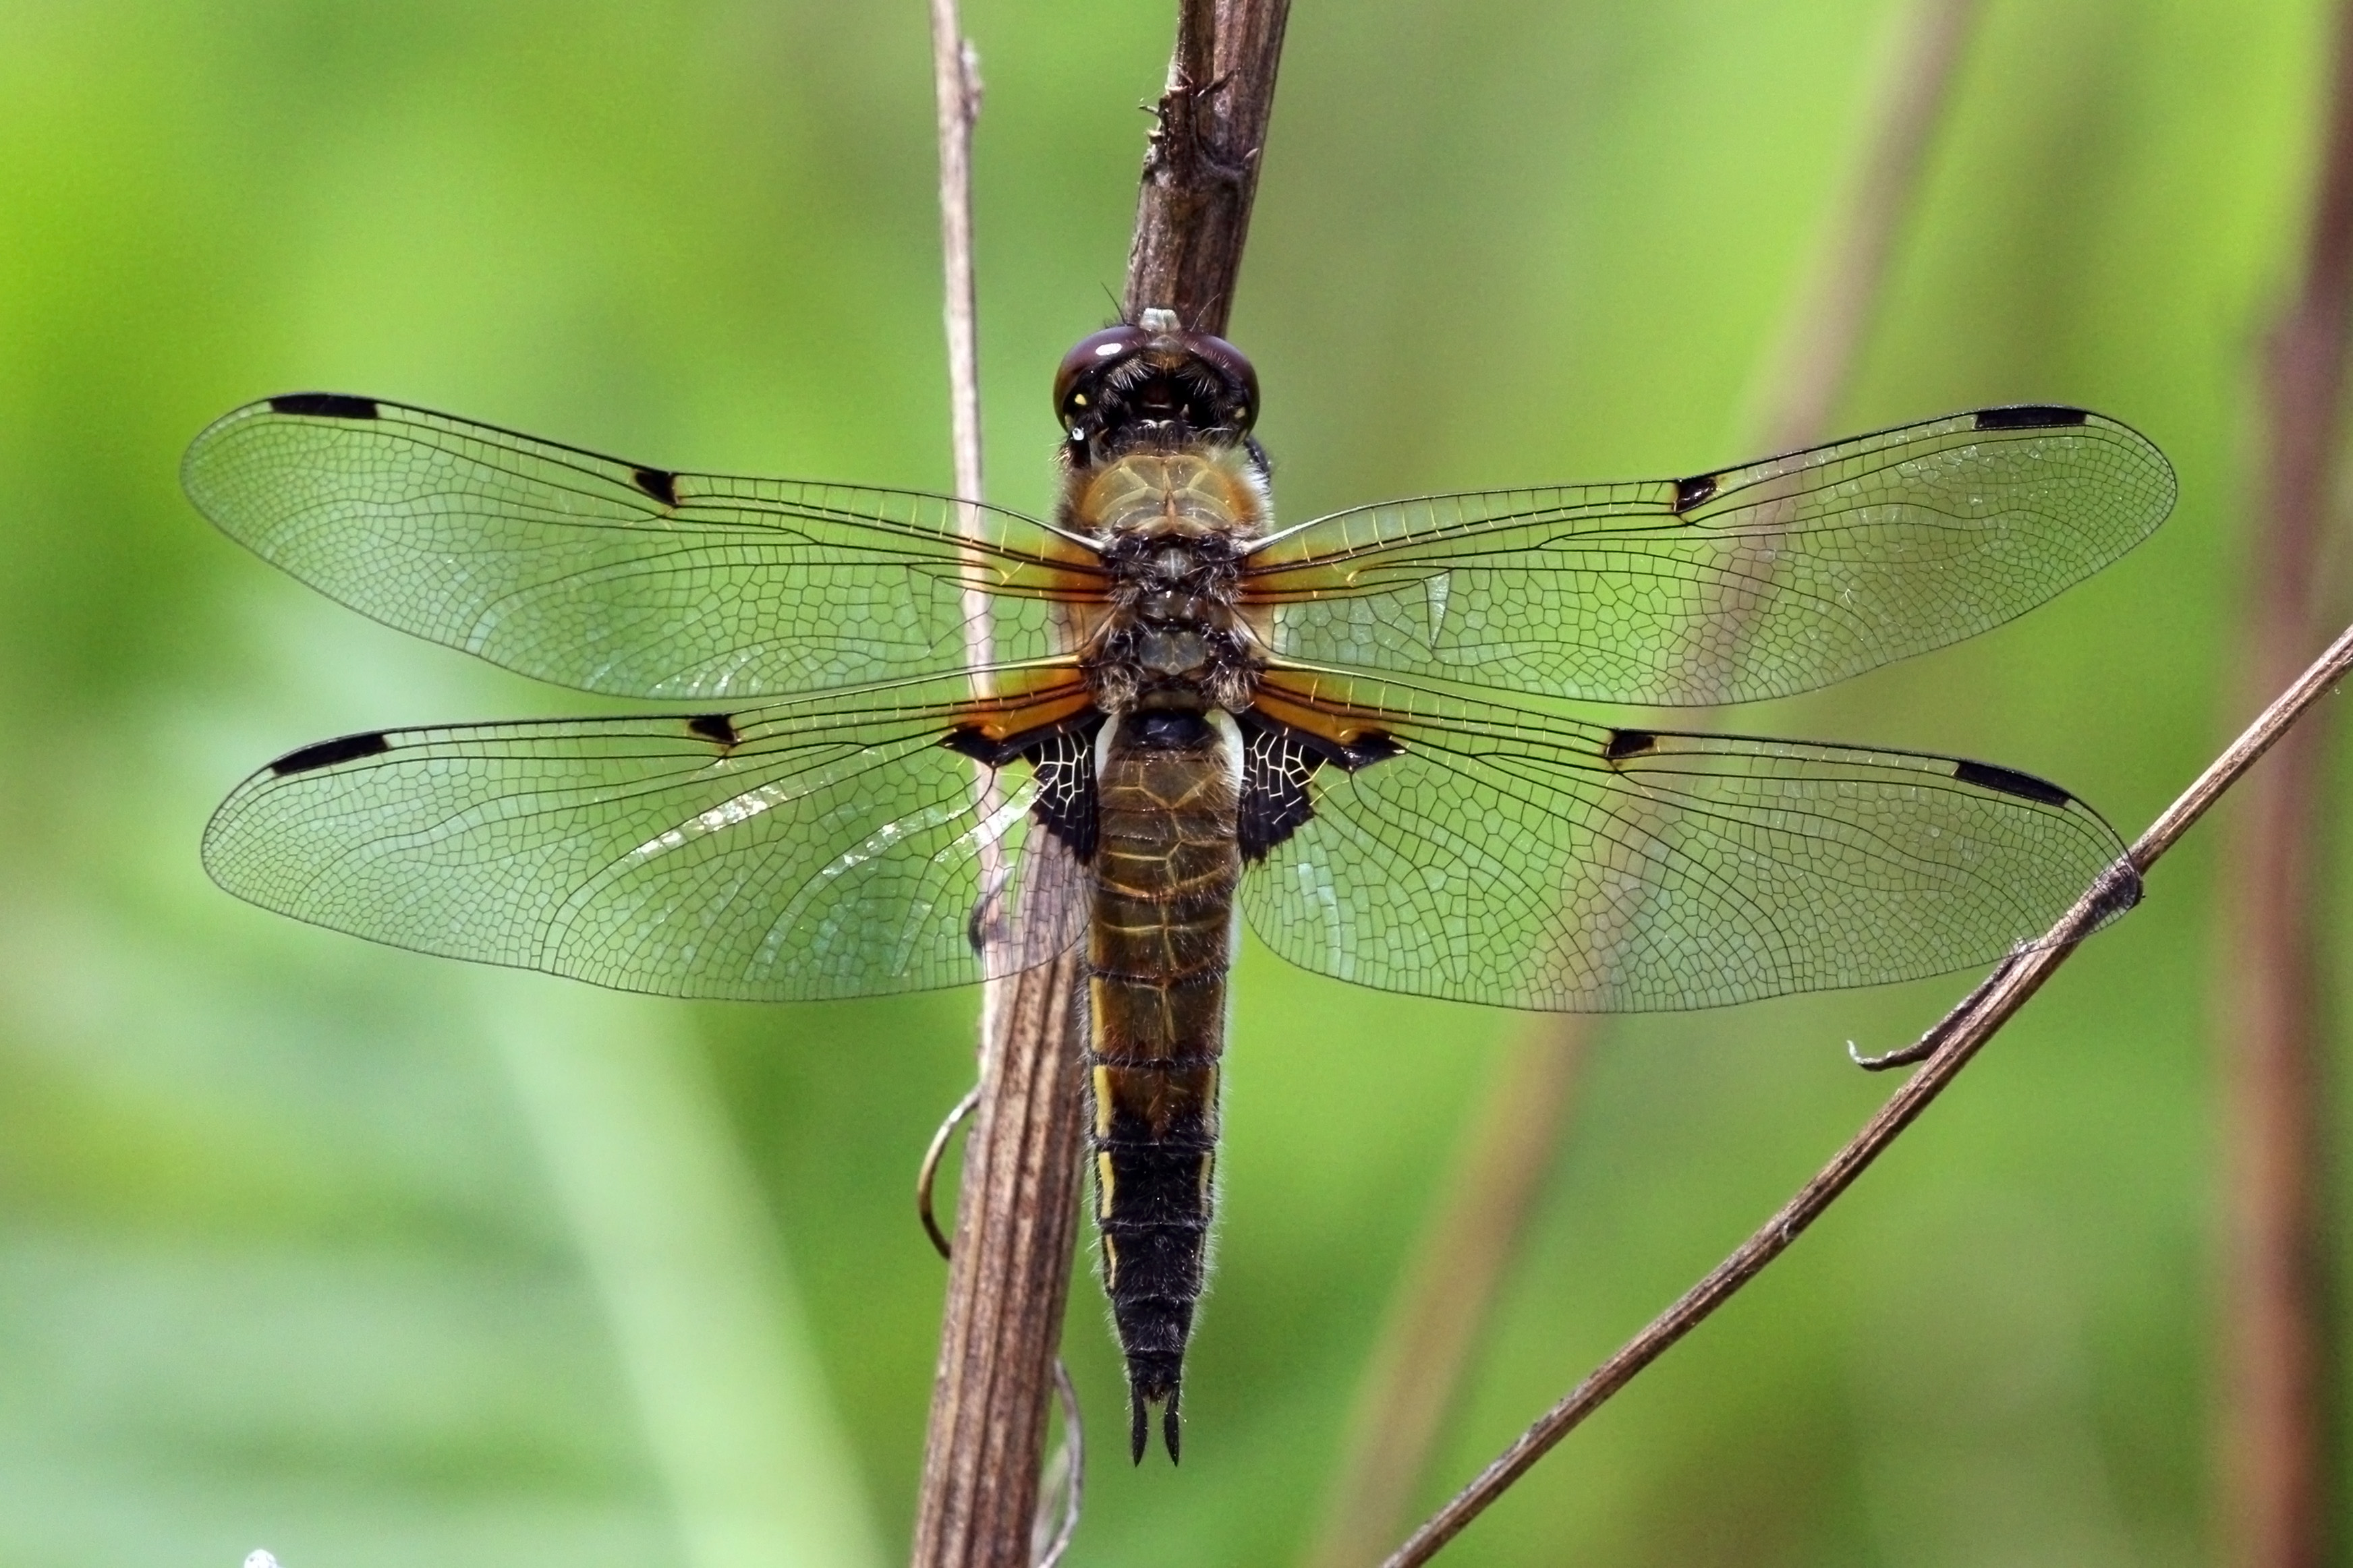 Four-spotted chaser (Libellula quadrimaculata) female P2